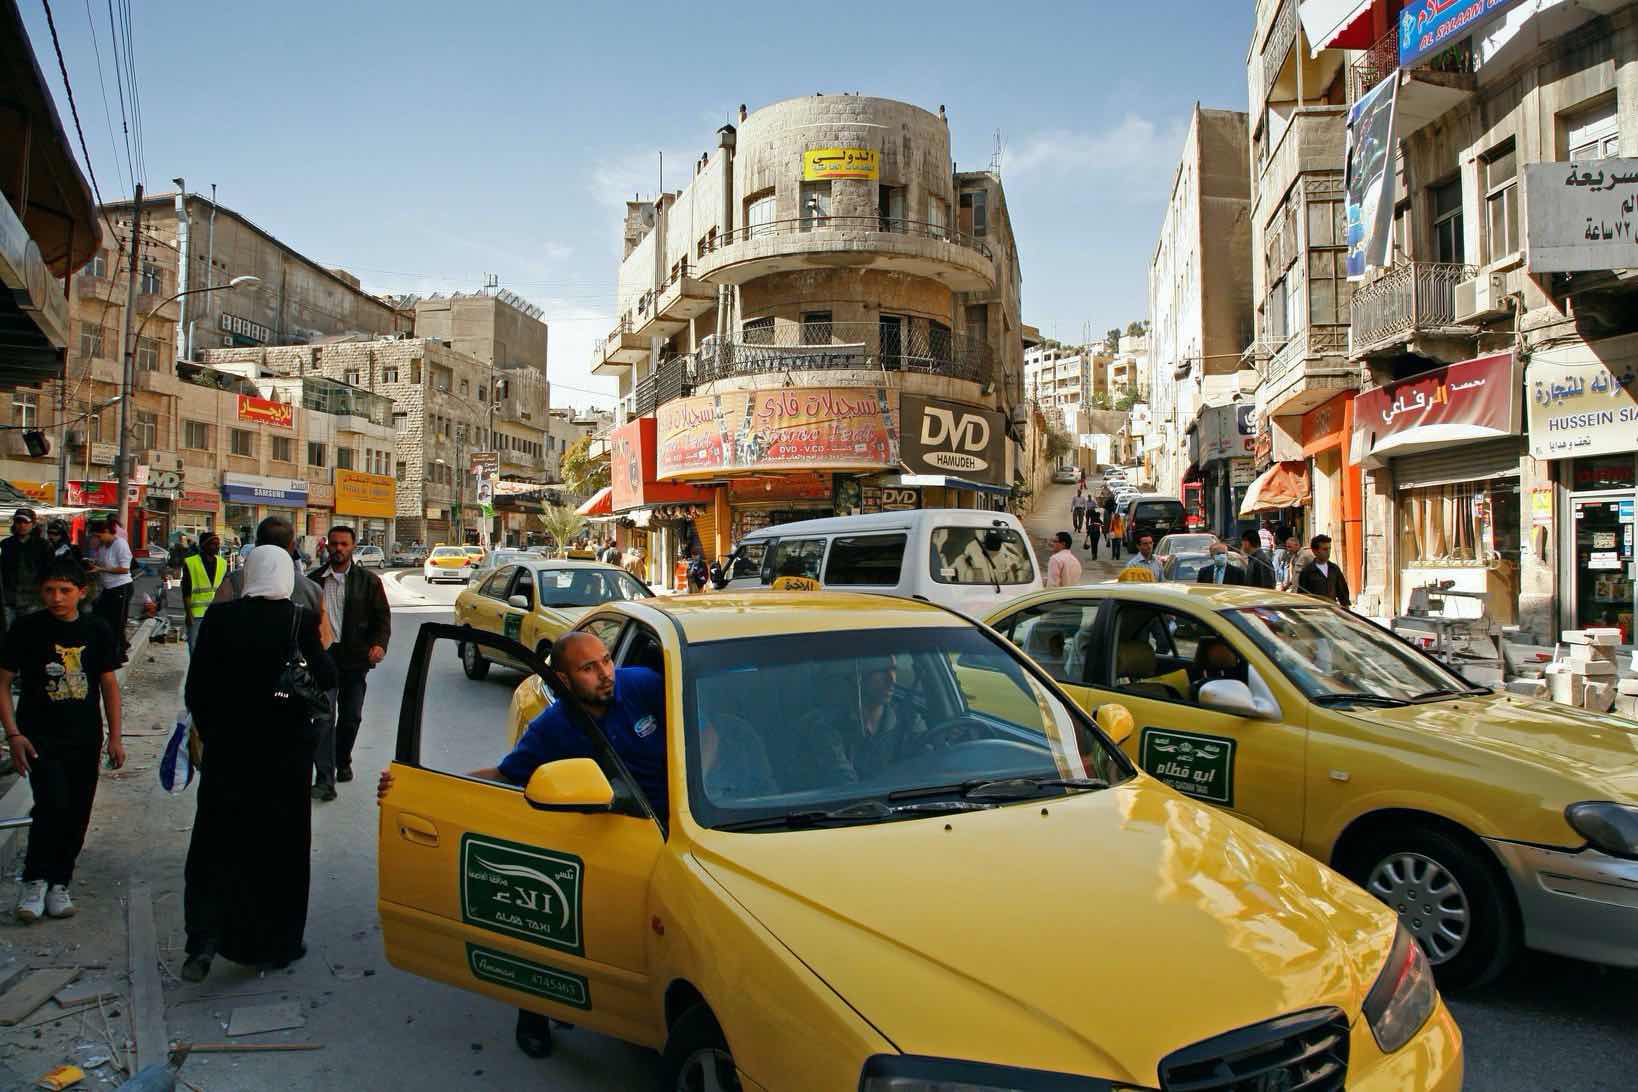 A busy intersection in downtown Amman, Jordan’s capital and political center.